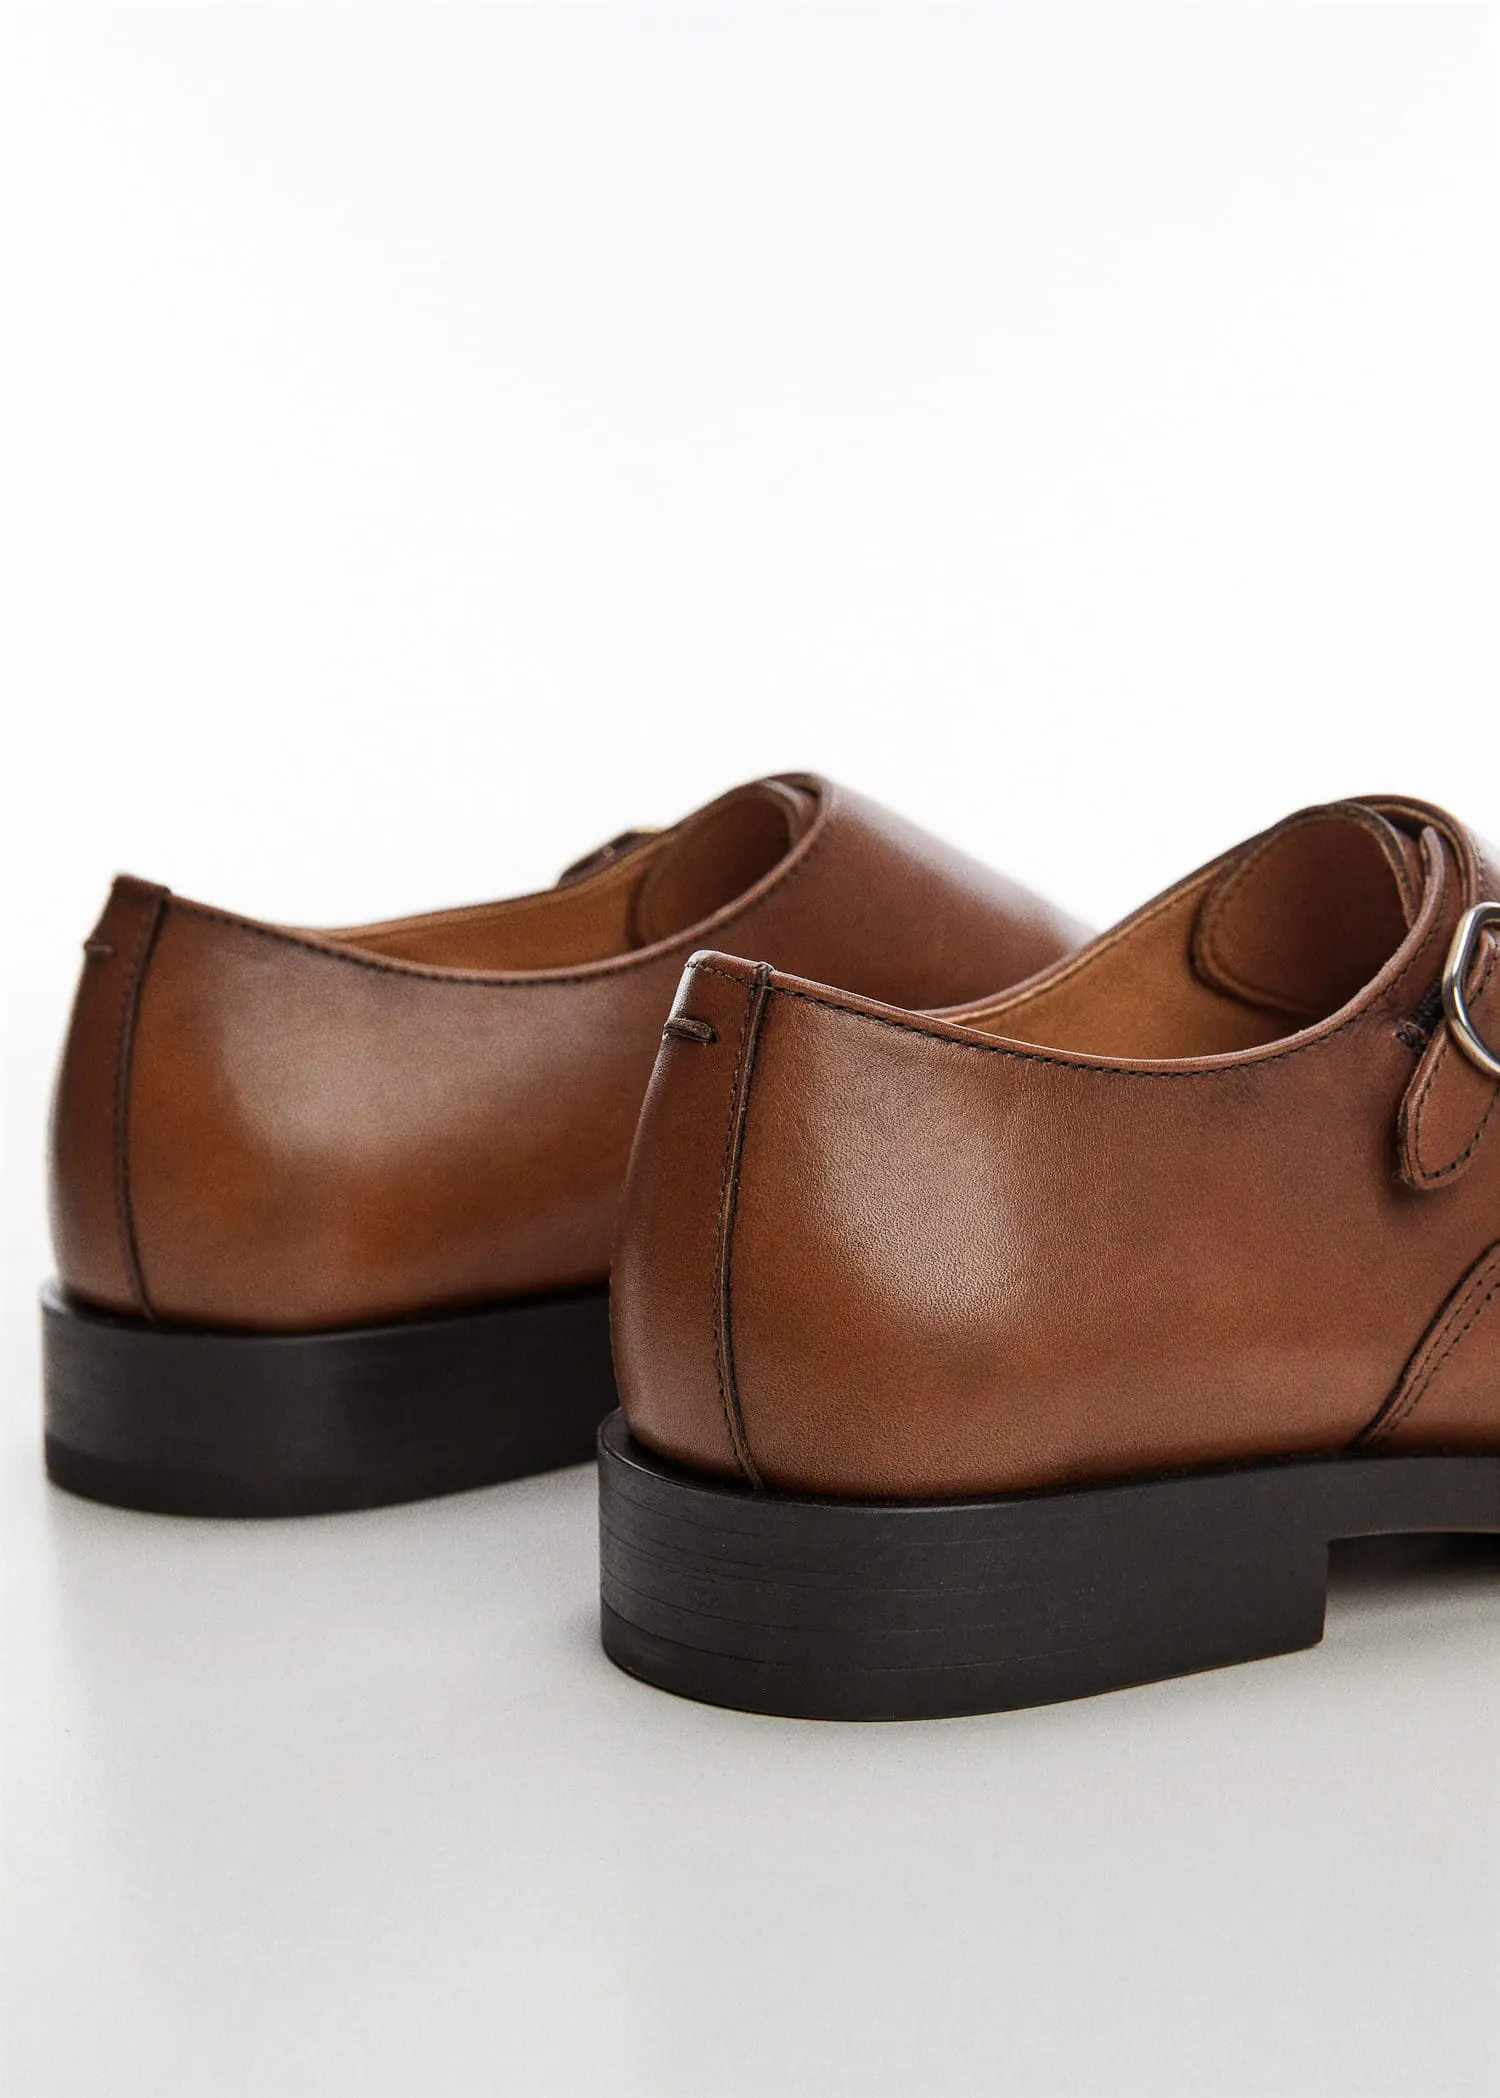 Mango Monk shoes with leather buckle. a close up of a pair of shoes on a table 